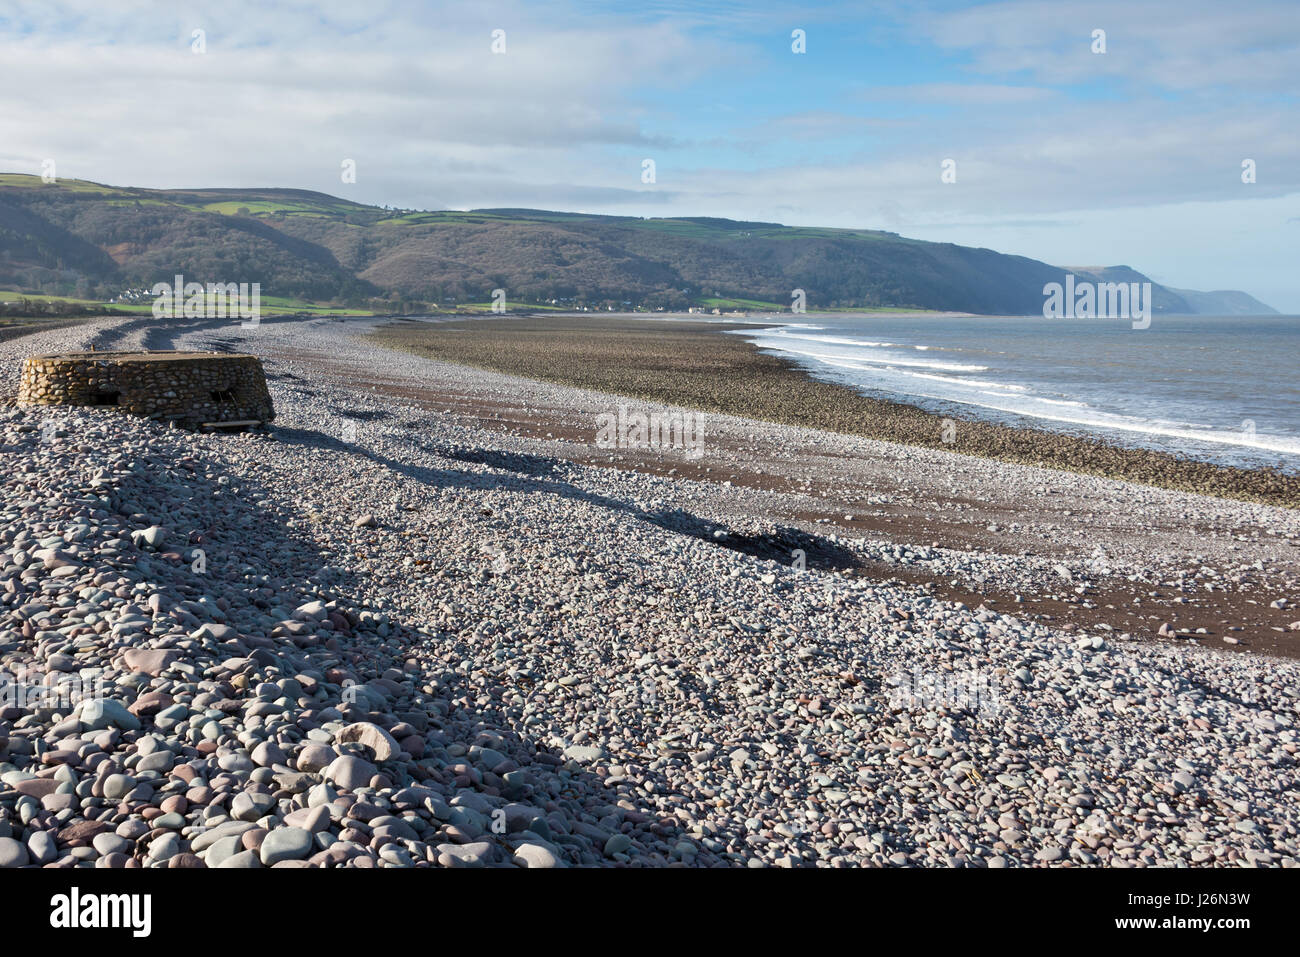 View along the beach in Porlock Bay with Porlock Weir and the hills of Exmoor in the distance. Part of the SW Coast path in Exmoor National Park Stock Photo